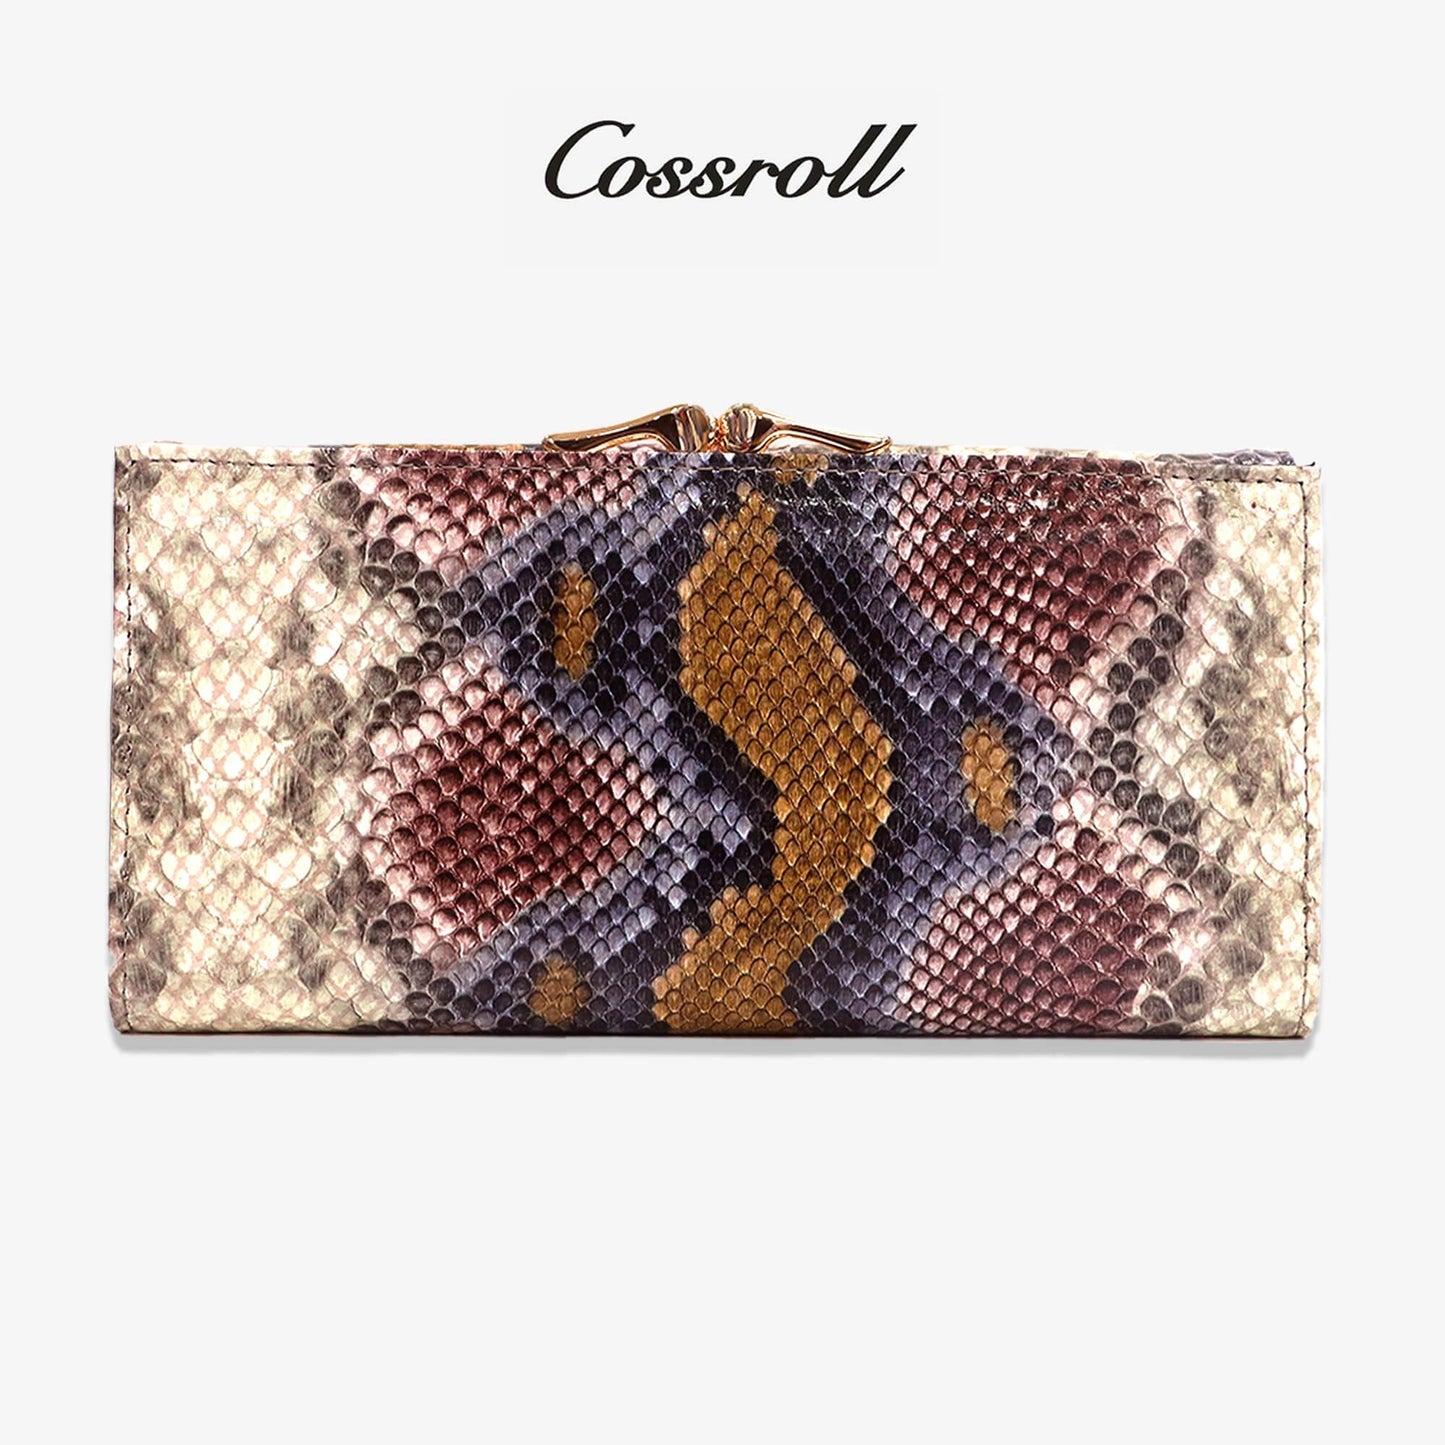 Python Women Leather Wallet Manufacturer Snake Pattern - cossroll.leather